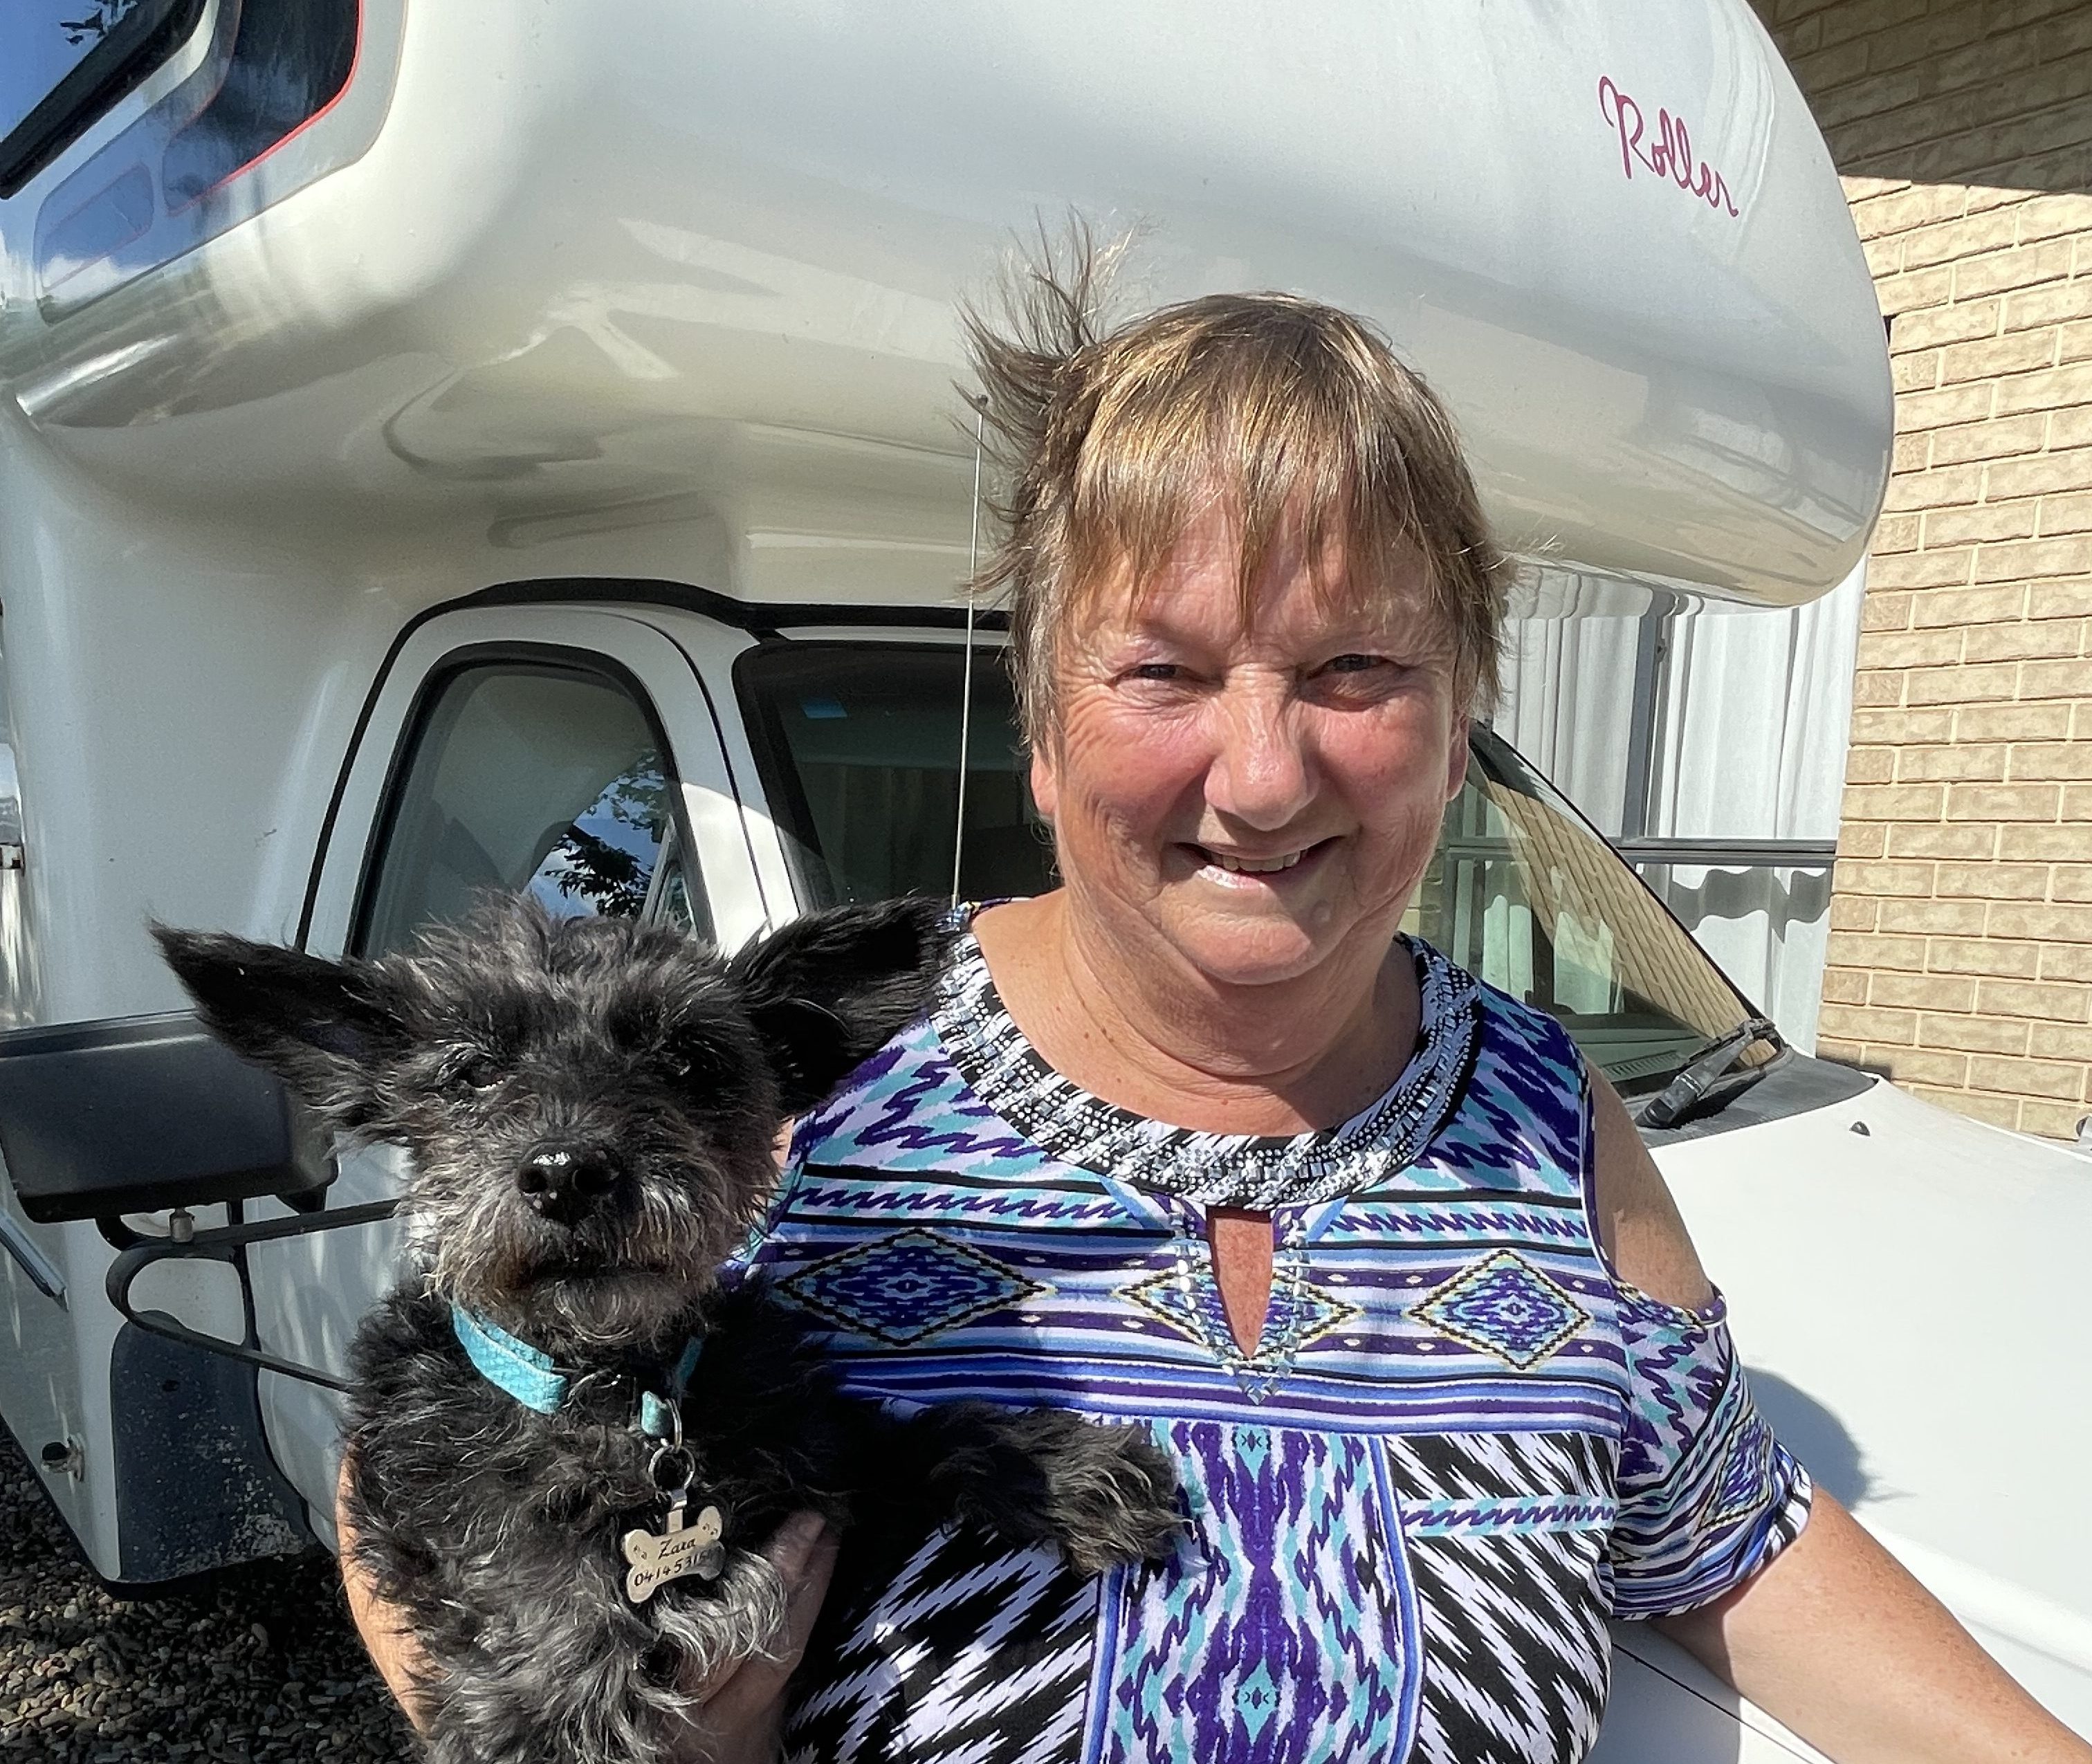 Her motorhome, her doggo and the open road - Leone goes where adventure takes her